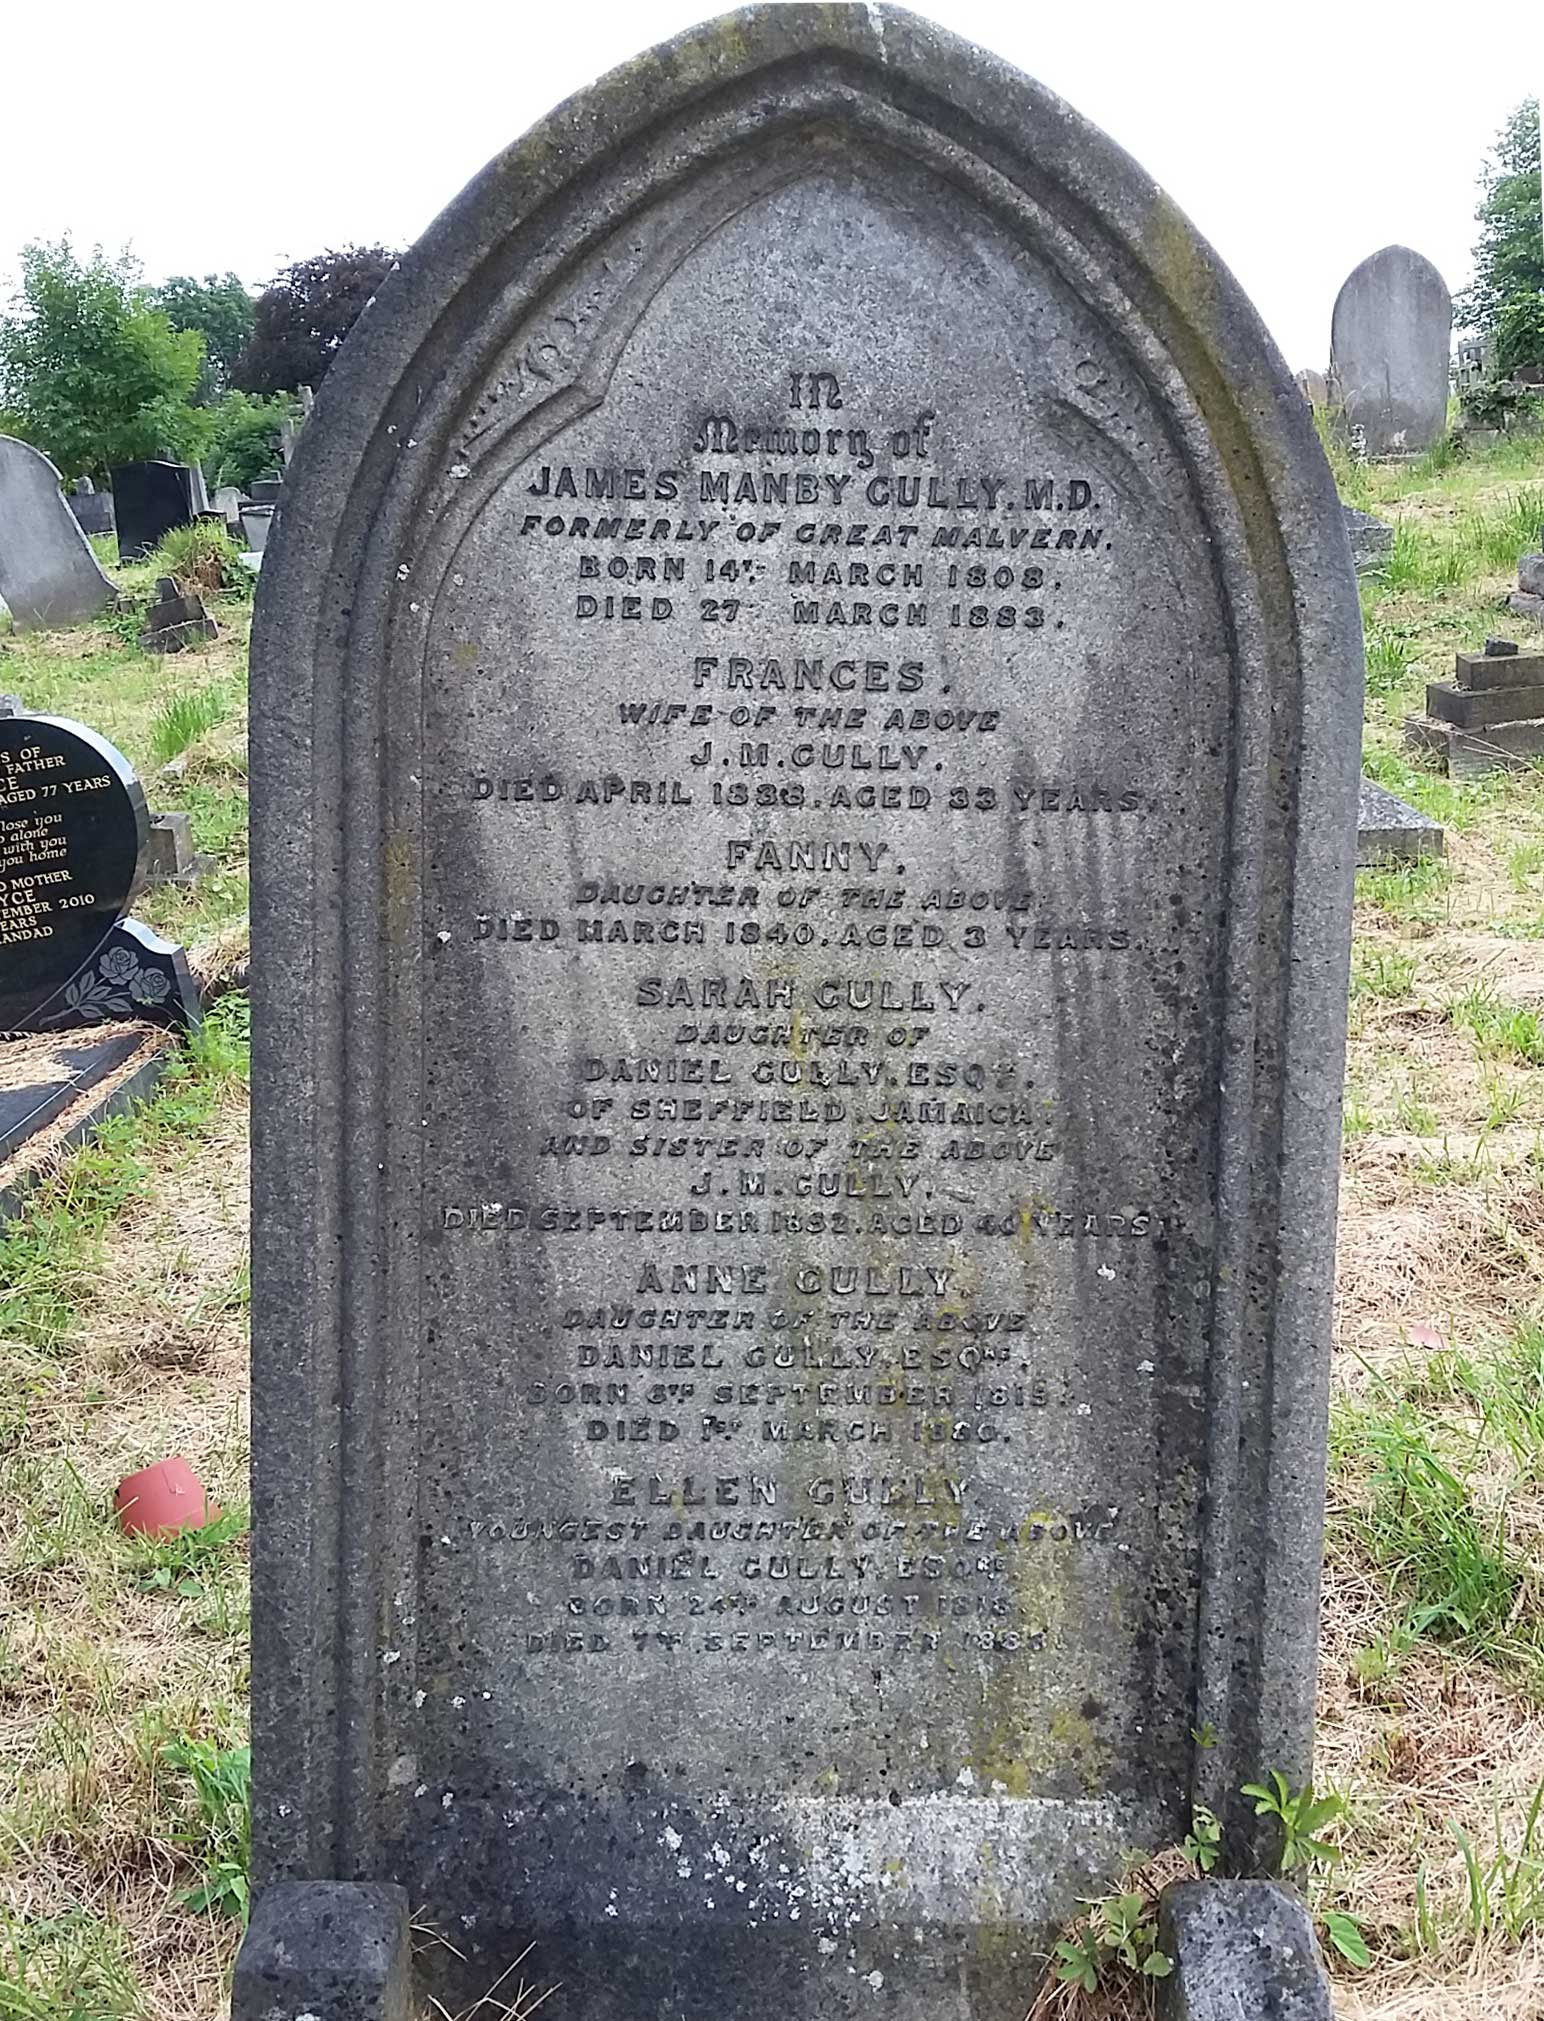 Dr Gully's headstone